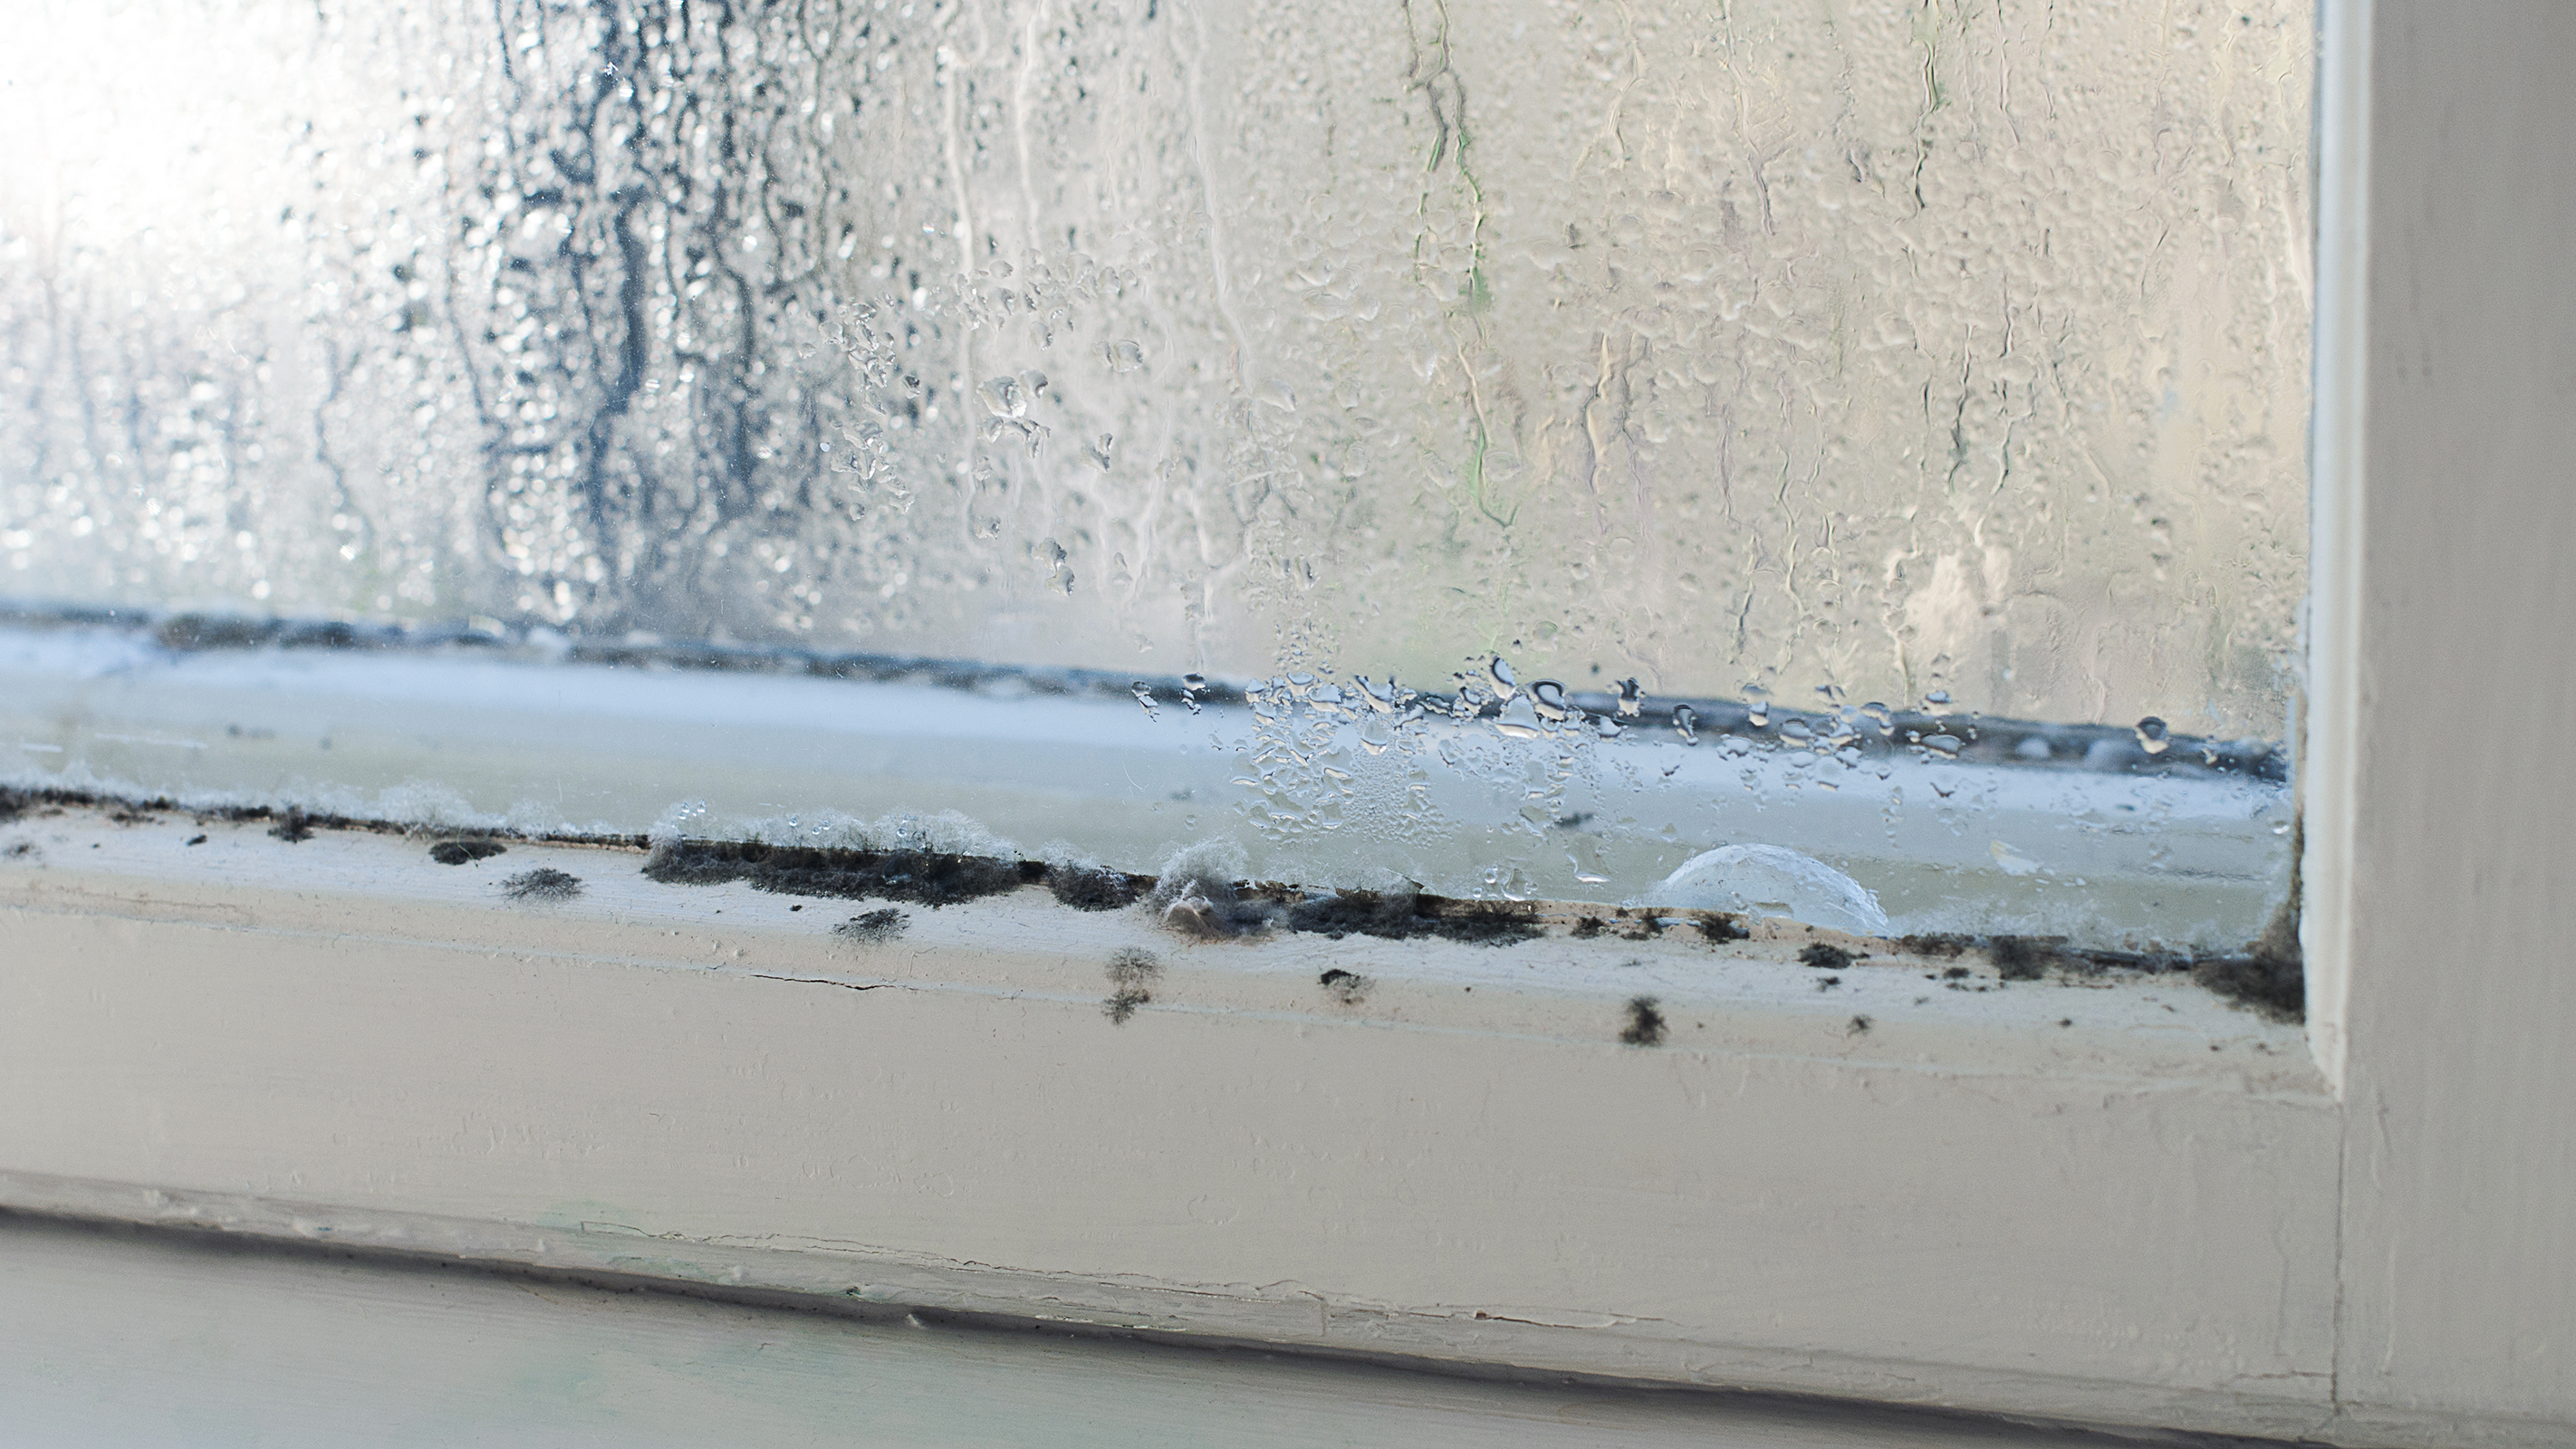 Stop condensation on windows with these expert approved tips and tricks